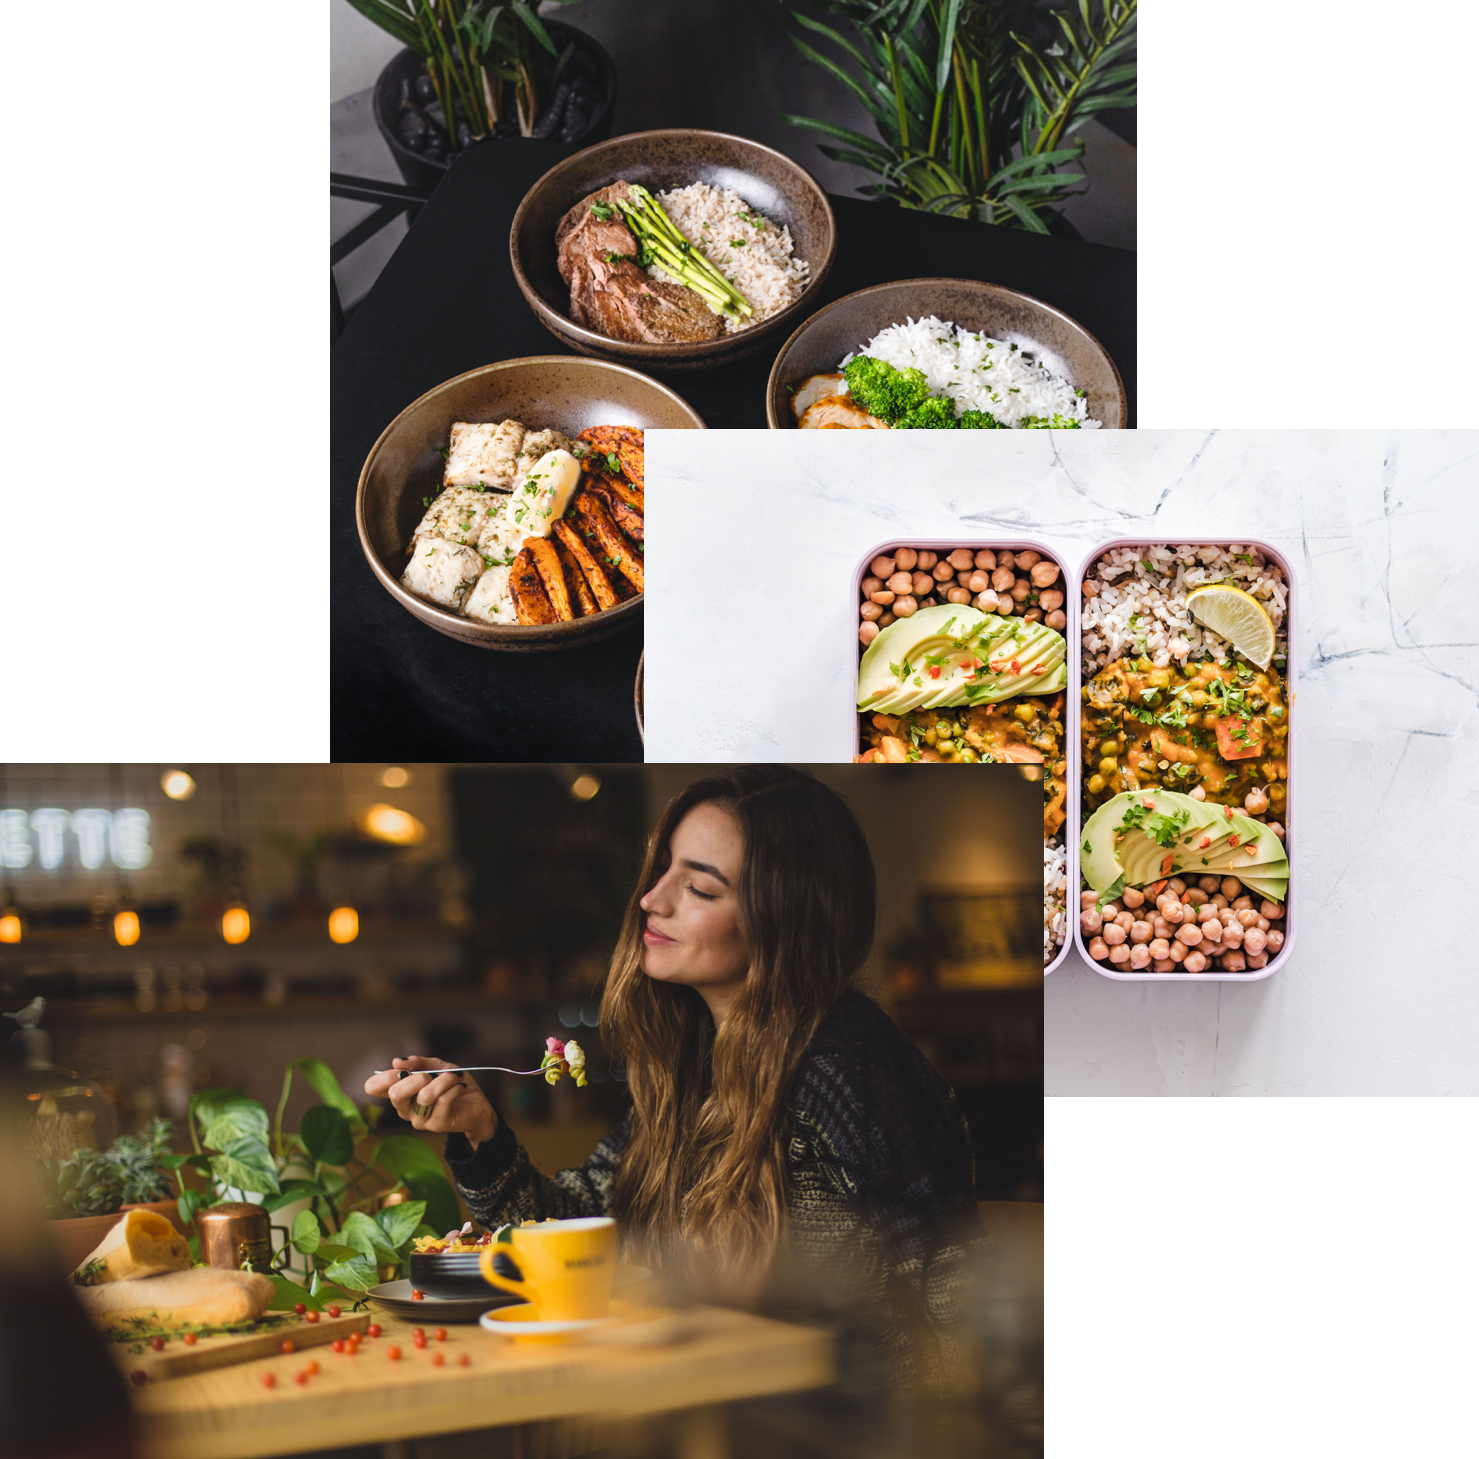 picture collage of food, includes a woman eating, a lunchbox meal and food bowls with meals